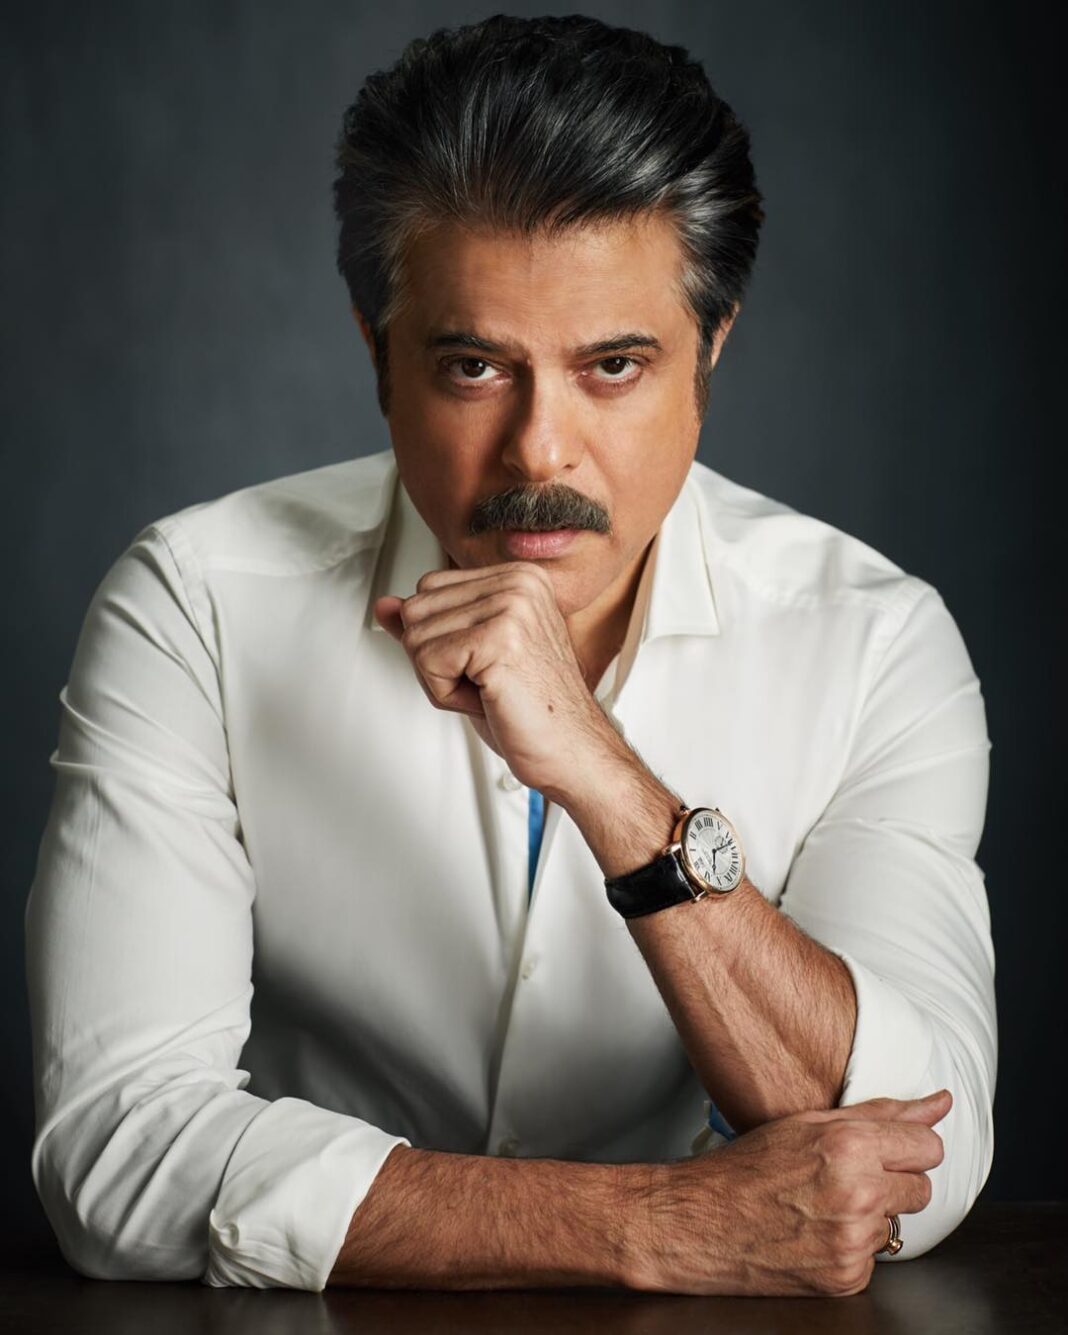 Anil Kapoor Instagram - #FanneyKhan has many faces, but don't be fooled by his appearance...He's hiding a whole world of secrets under that silver hair! @kriarj @tseries.official @romppictures @rohanshrestha 📸